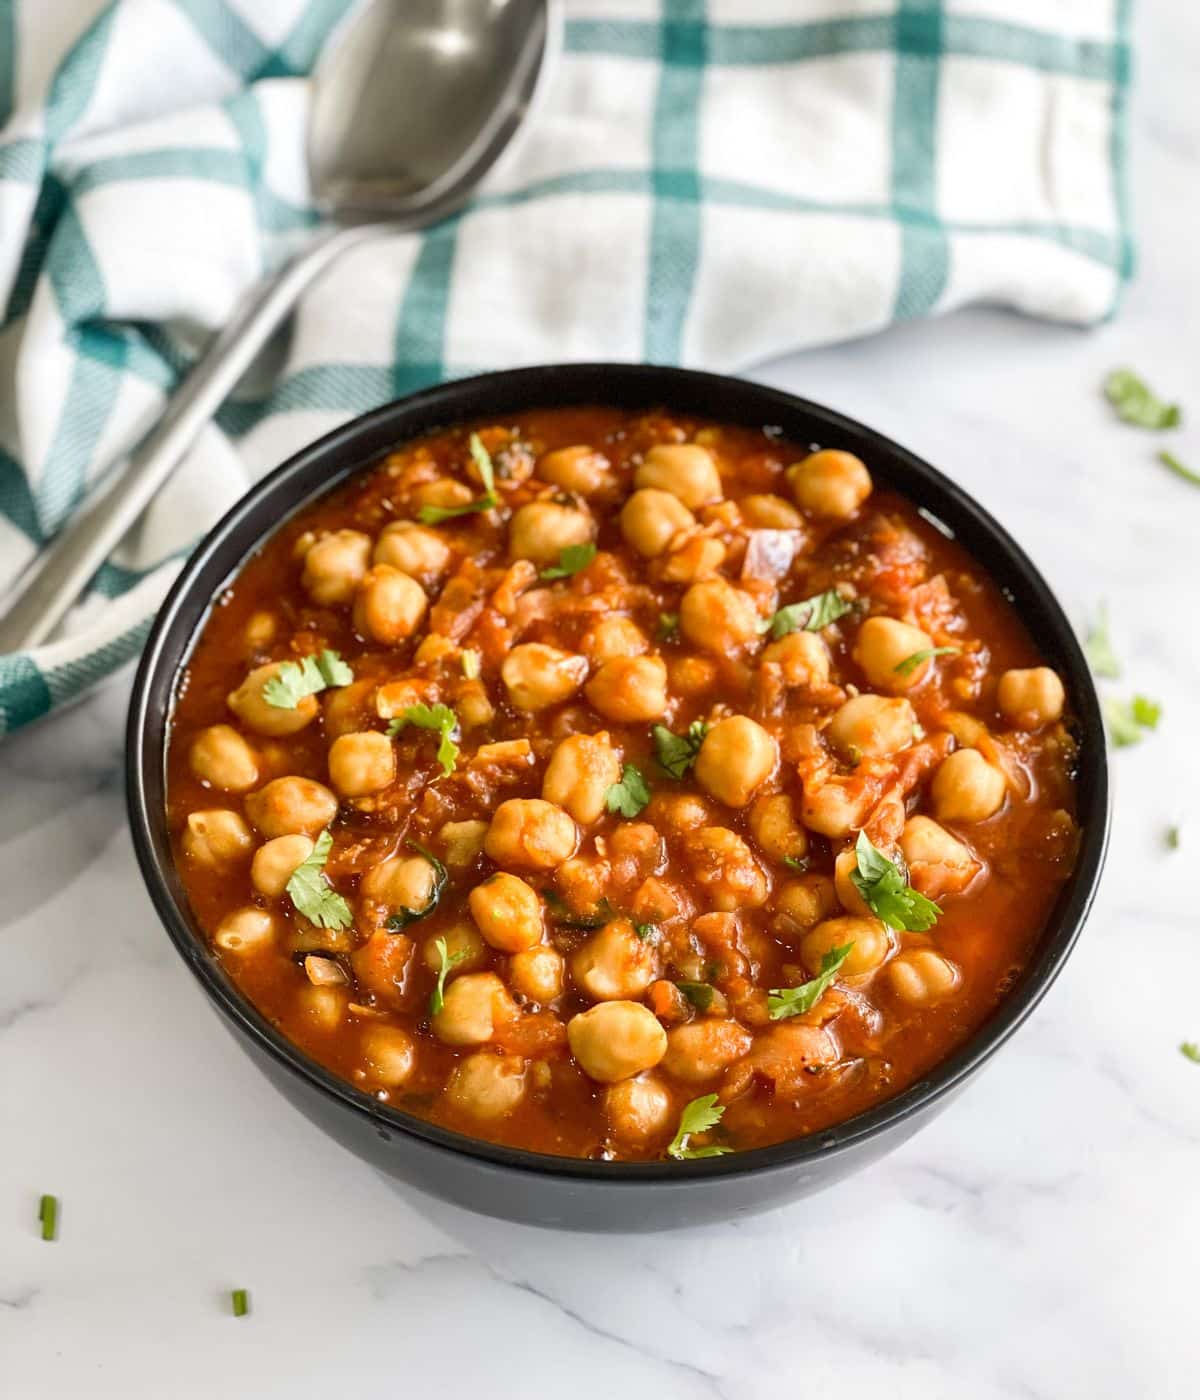 A bowl of vegan chana masala curry is on the table.